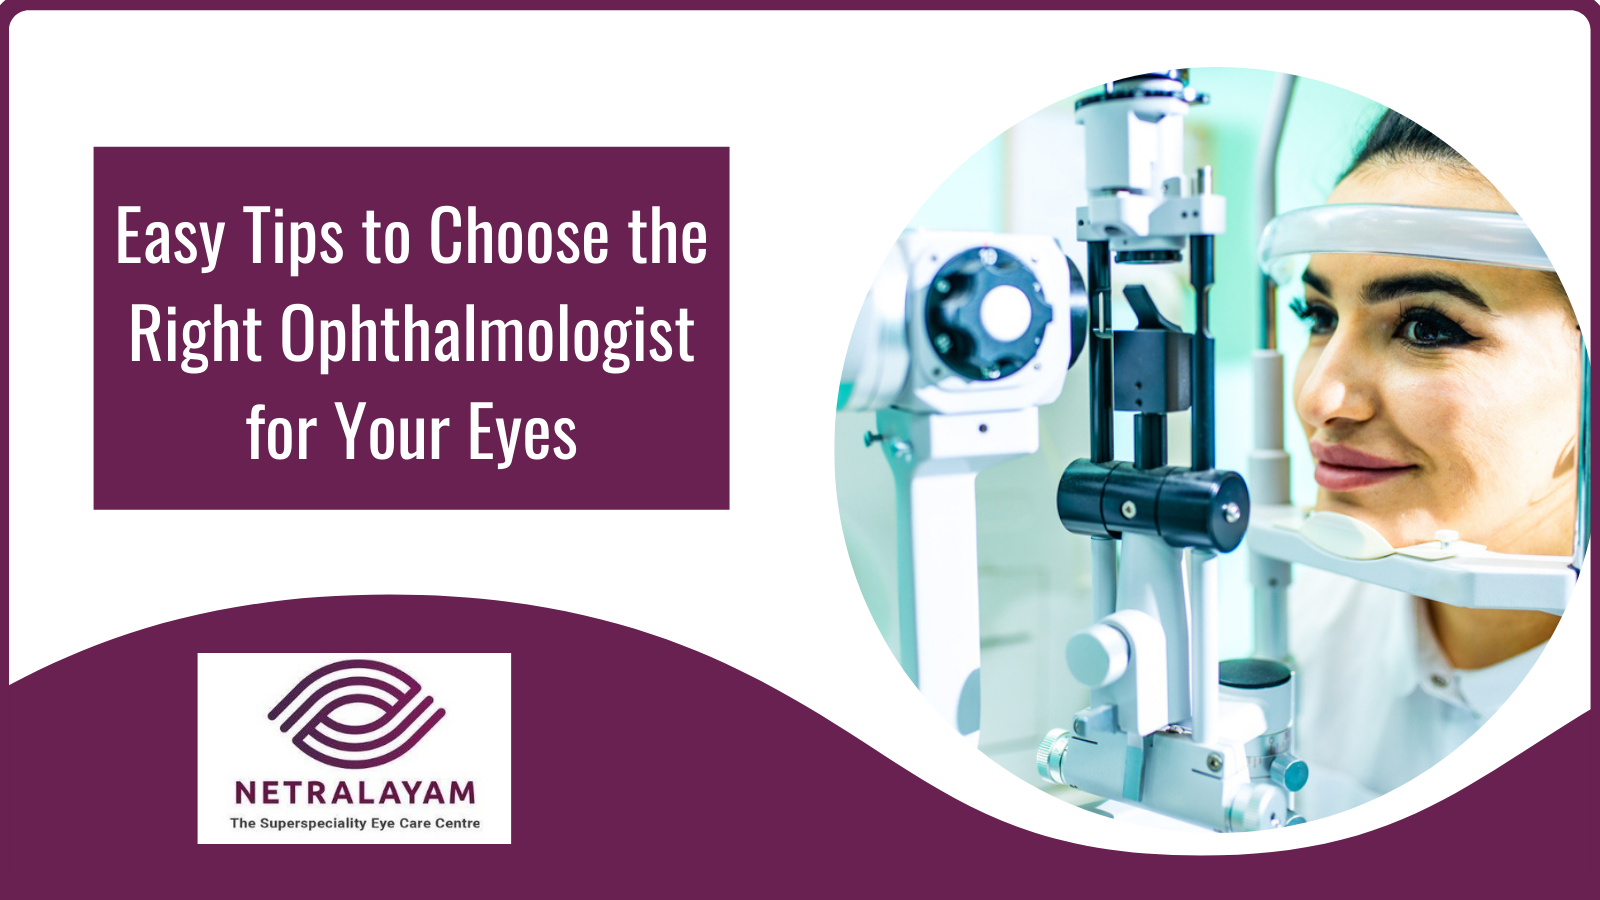 Easy Tips to Choose the Right Ophthalmologist for Your Eyes